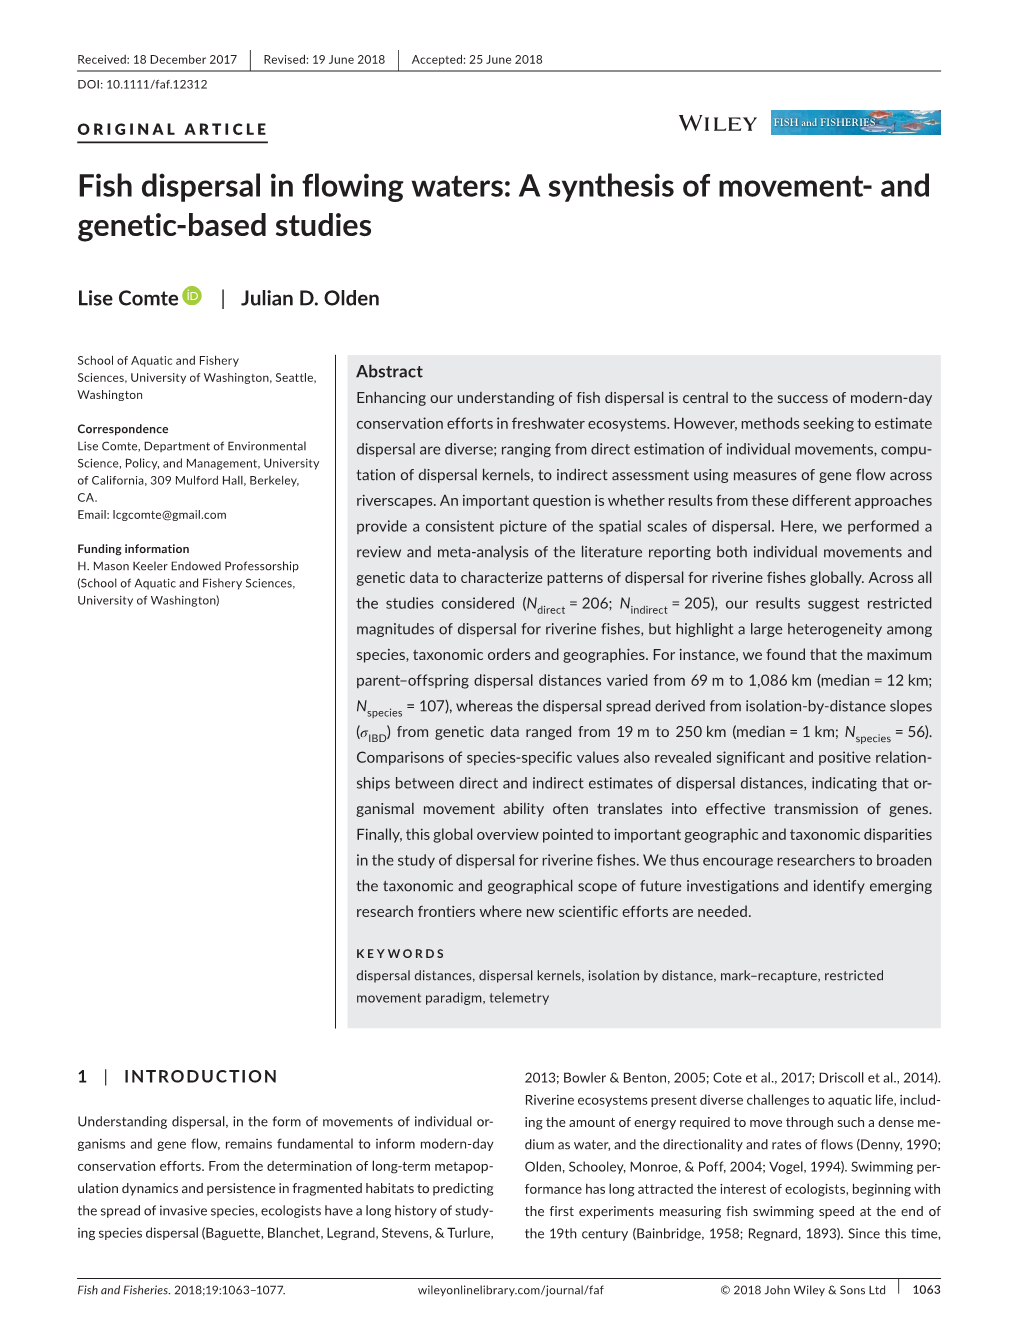 Fish Dispersal in Flowing Waters: a Synthesis of Movement- and Genetic